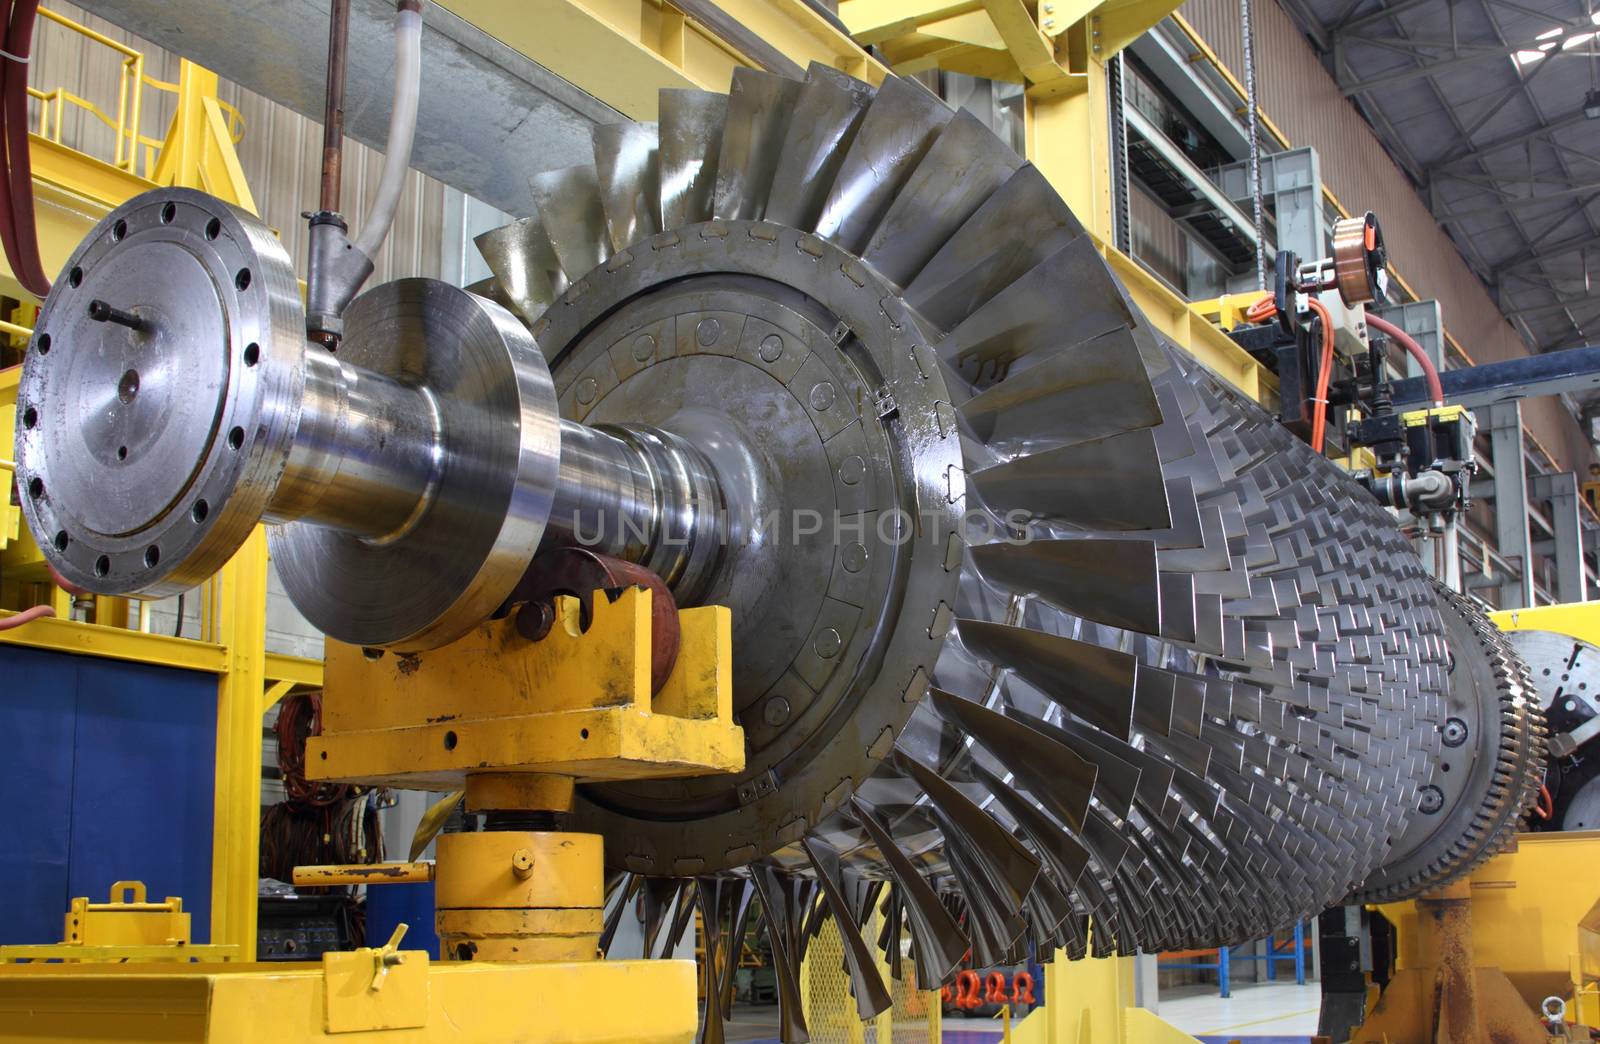 Gas Turbine rotor being serviced at workshop